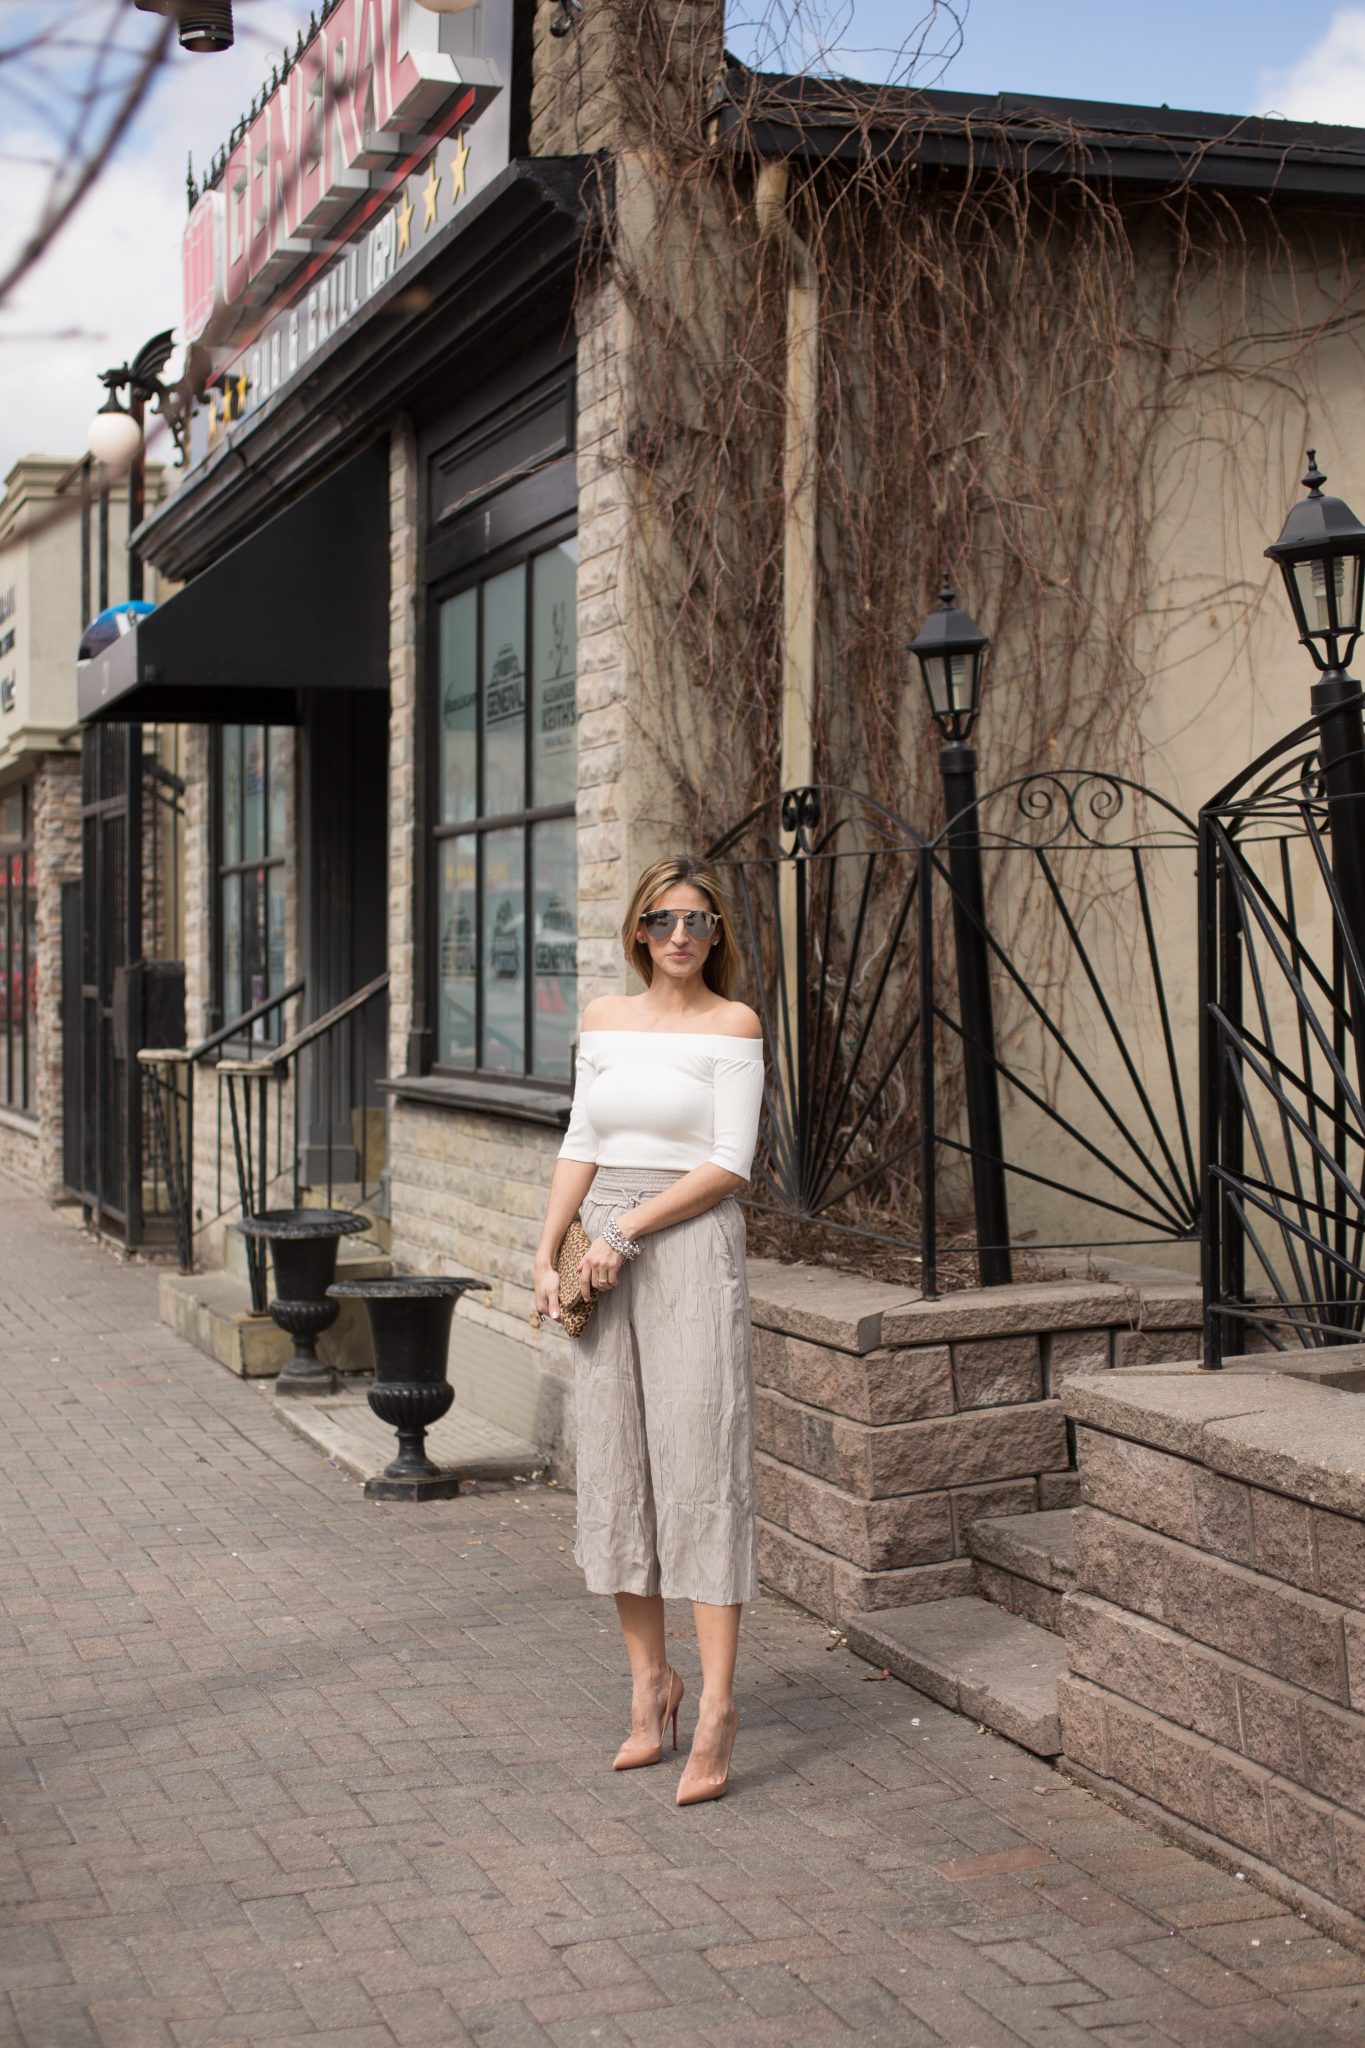 Lucky 7 Ribbed Off the Shoulder Top Jean Machine, Wilfred Nanterre pants from Aritzia, Nude Christian Louboutin pumps, Dior So Real Sunglasses, leaopard print clutch from Charming Charlie